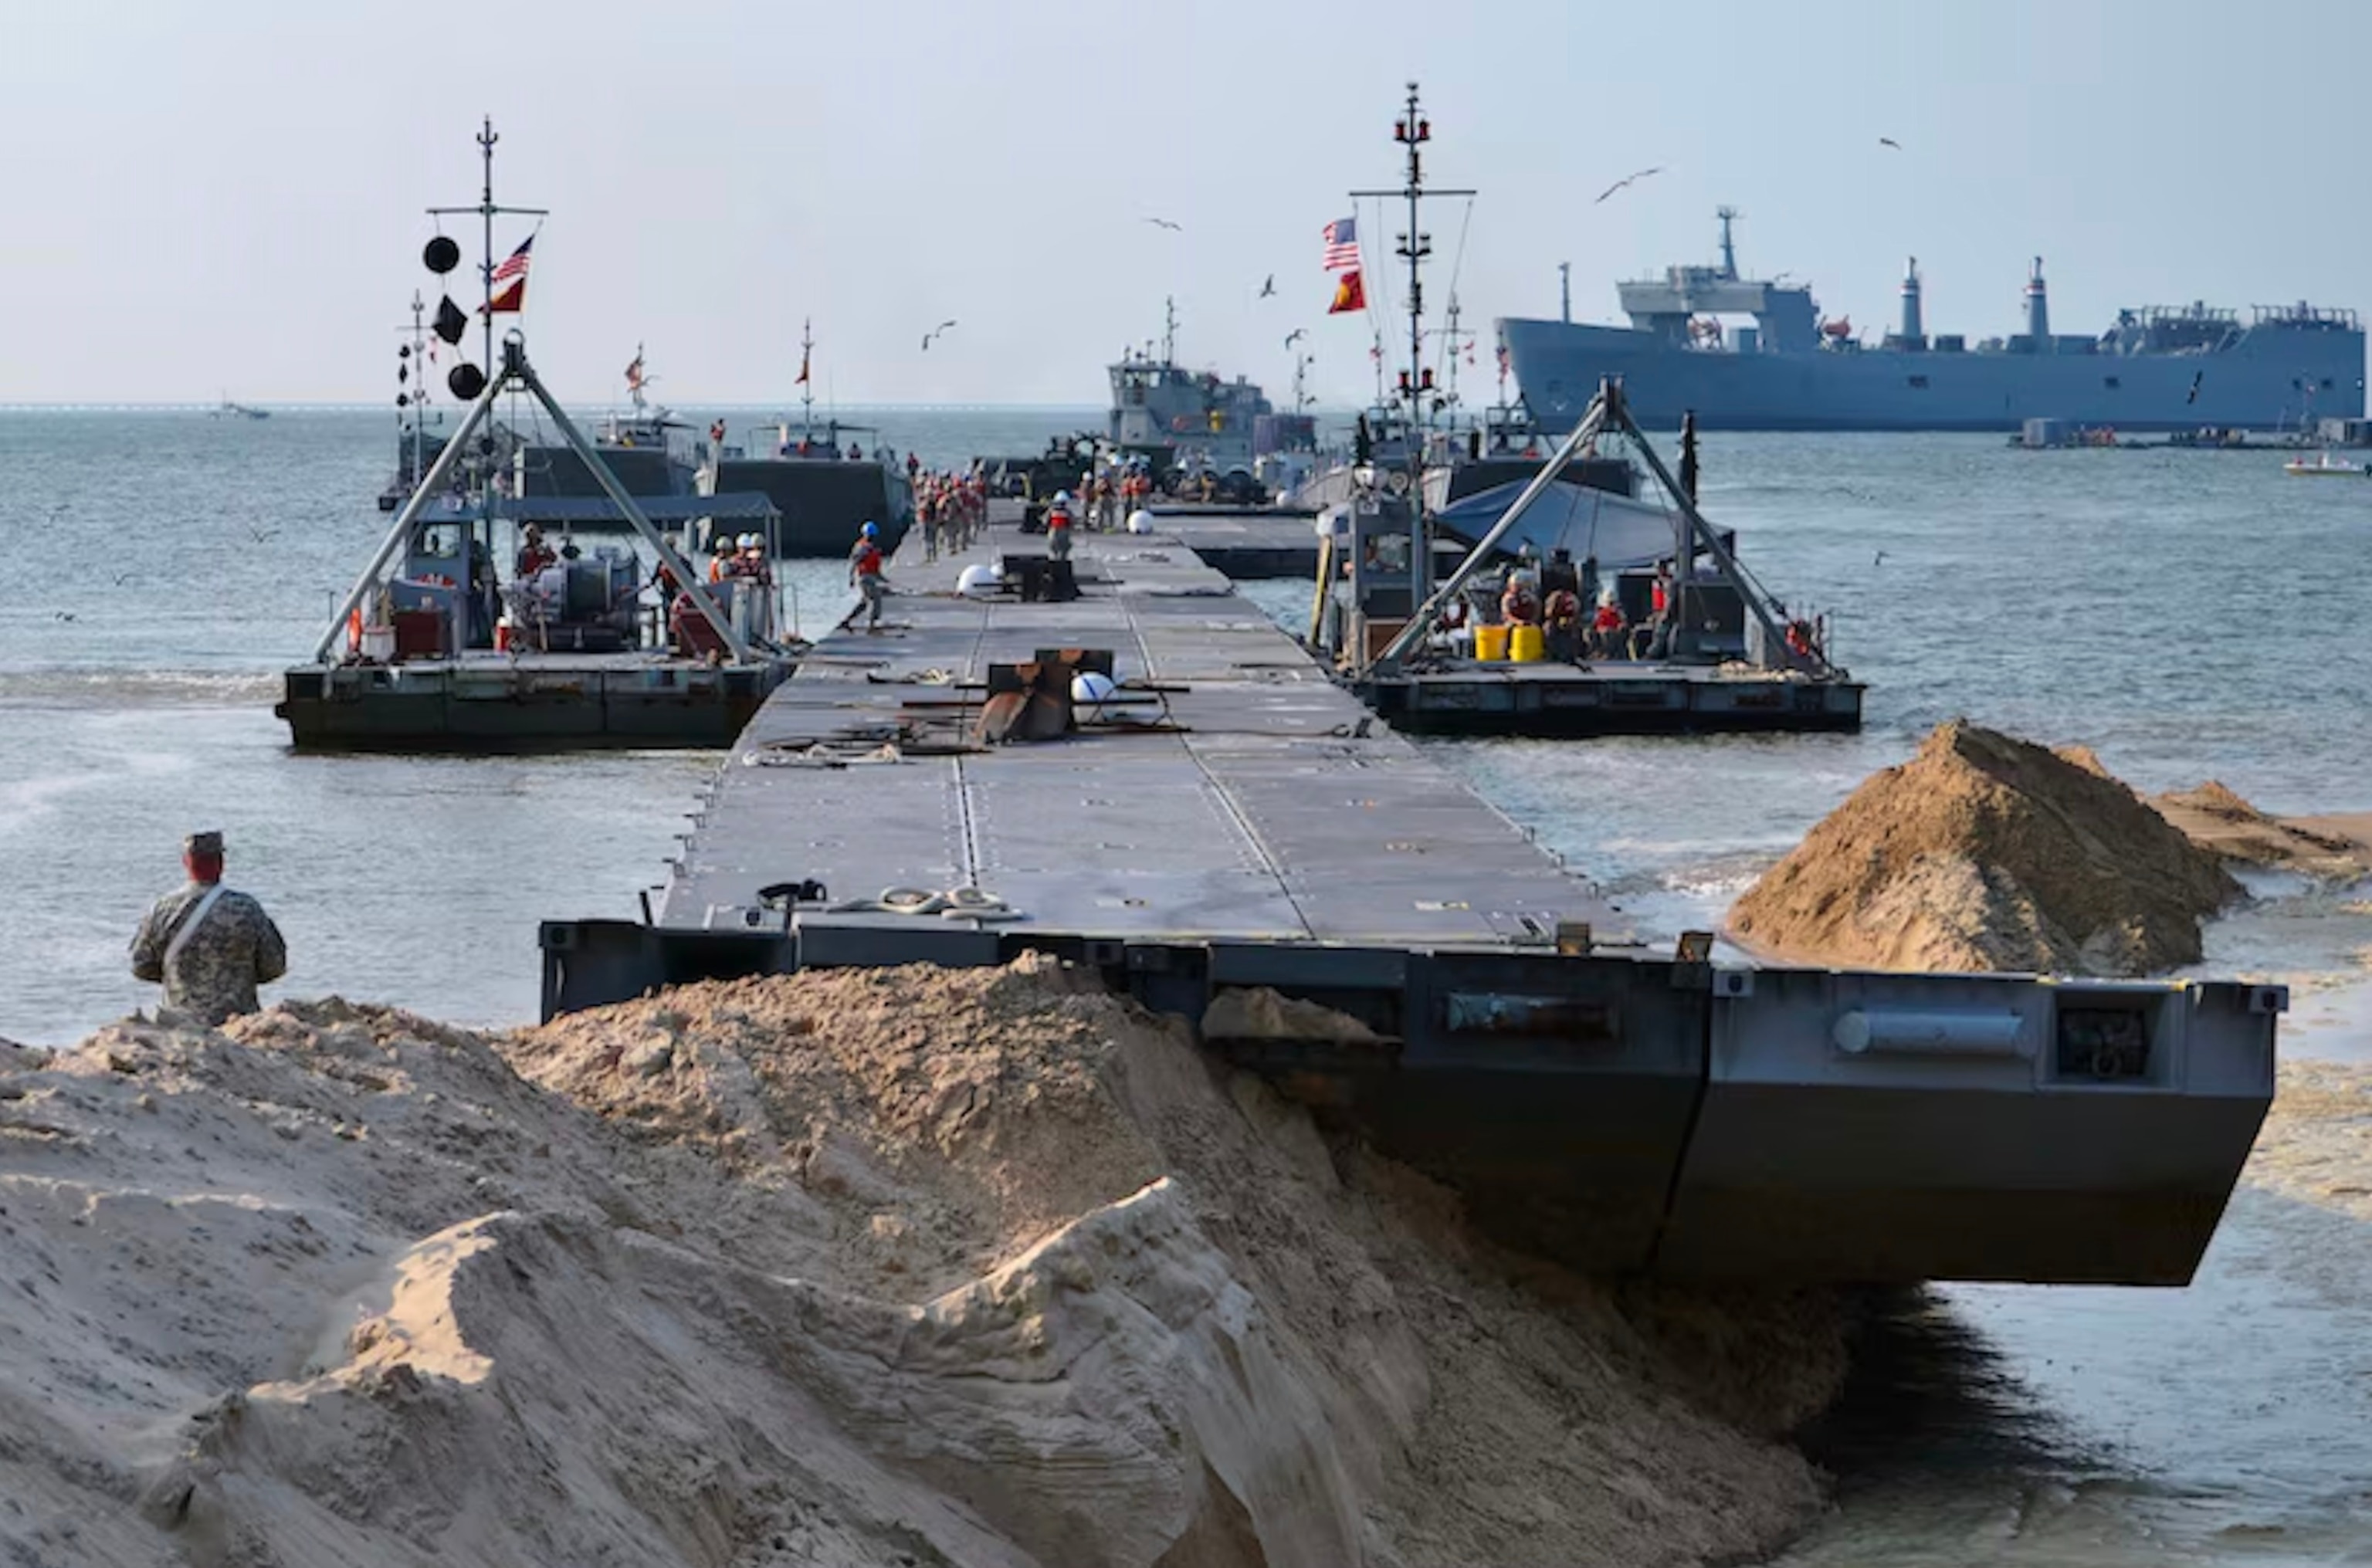 PHOTO: The Trident pier rests on the shore of Fort Story, Va., during the preliminary stages of the Joint Logistics-Over-the-Shore exercise, Aug. 17, 2012.